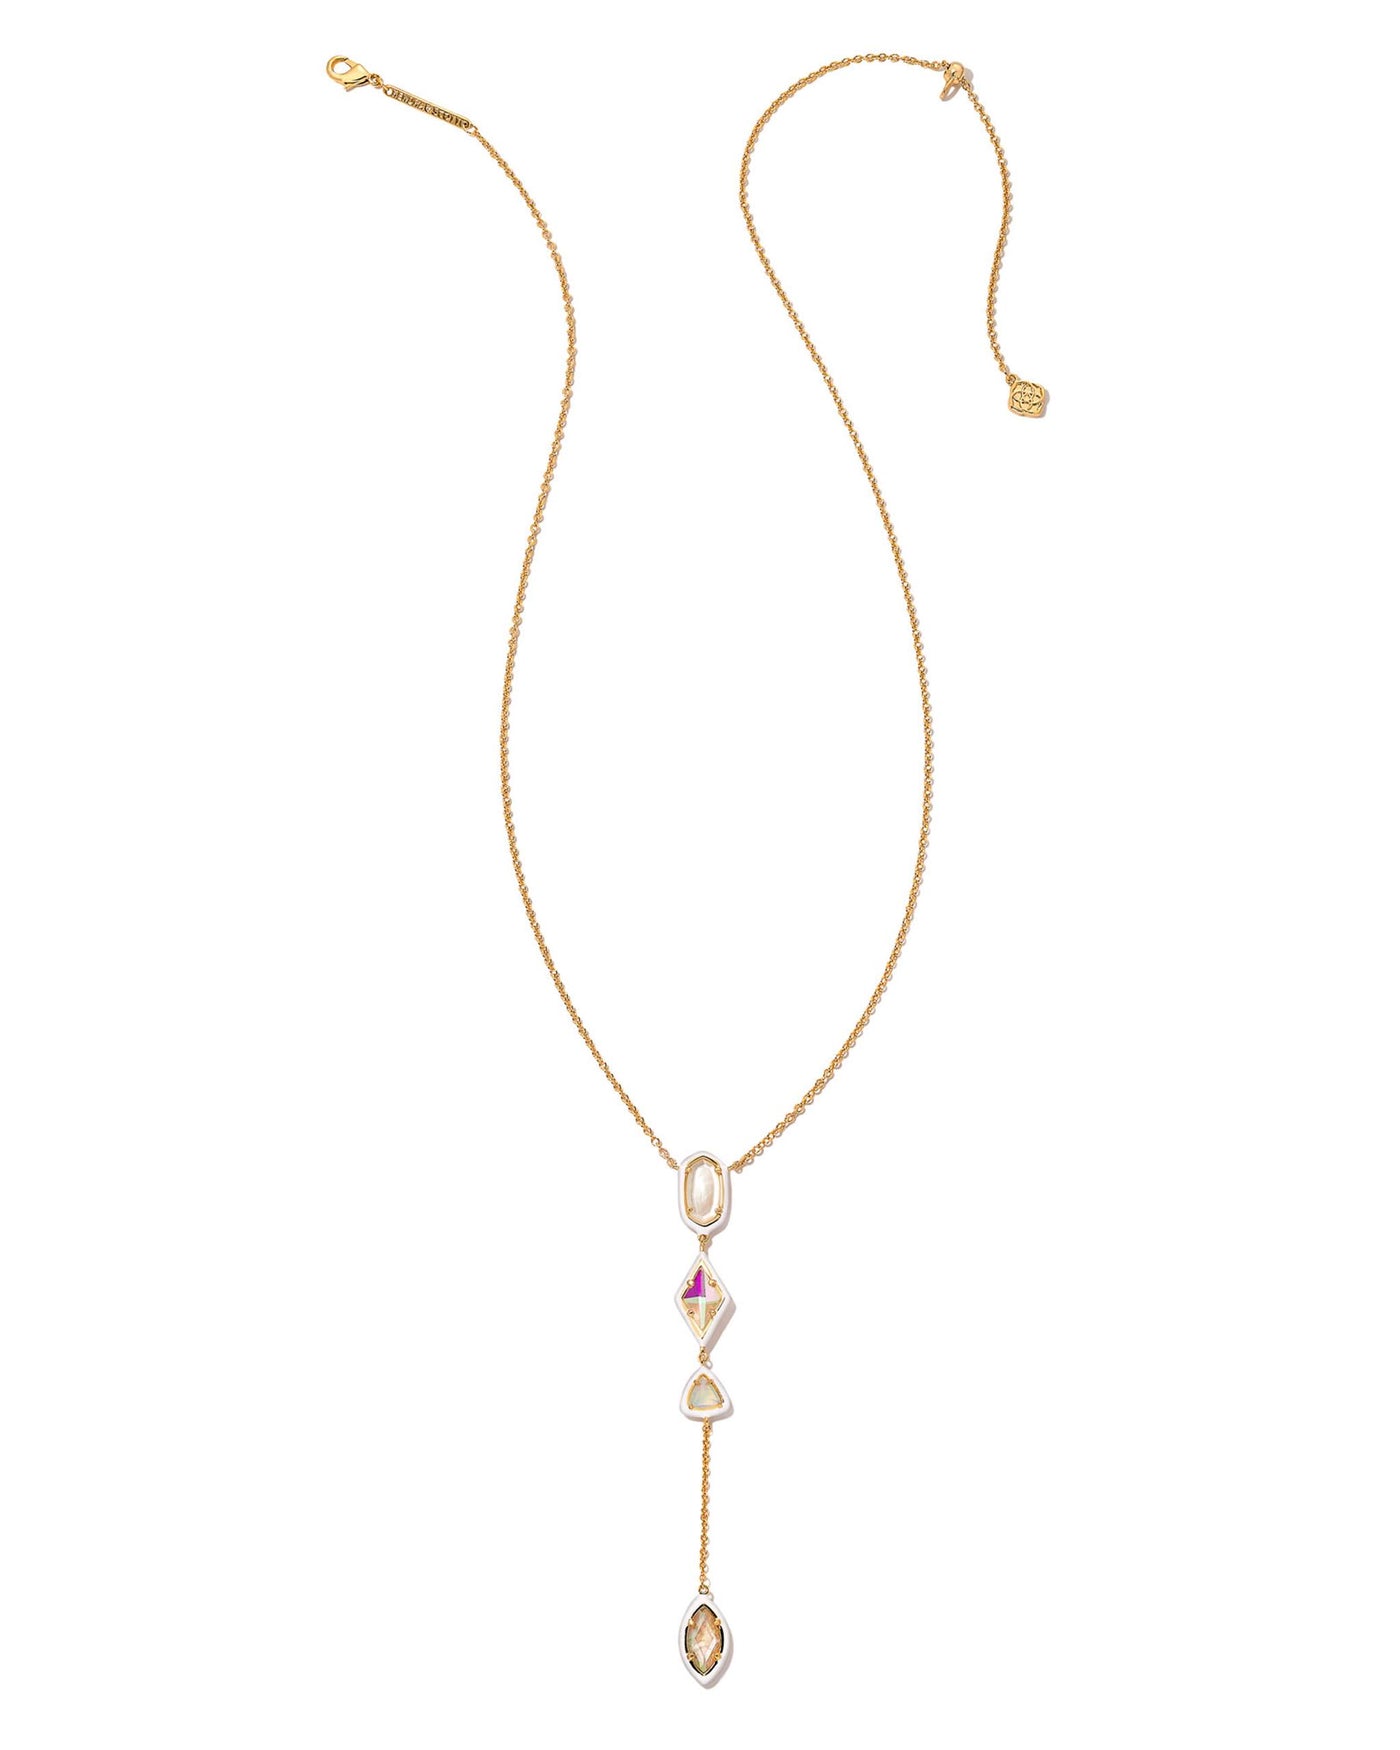 Gold Tone Necklace Featuring Ombre Ivory Mix by Kendra Scott